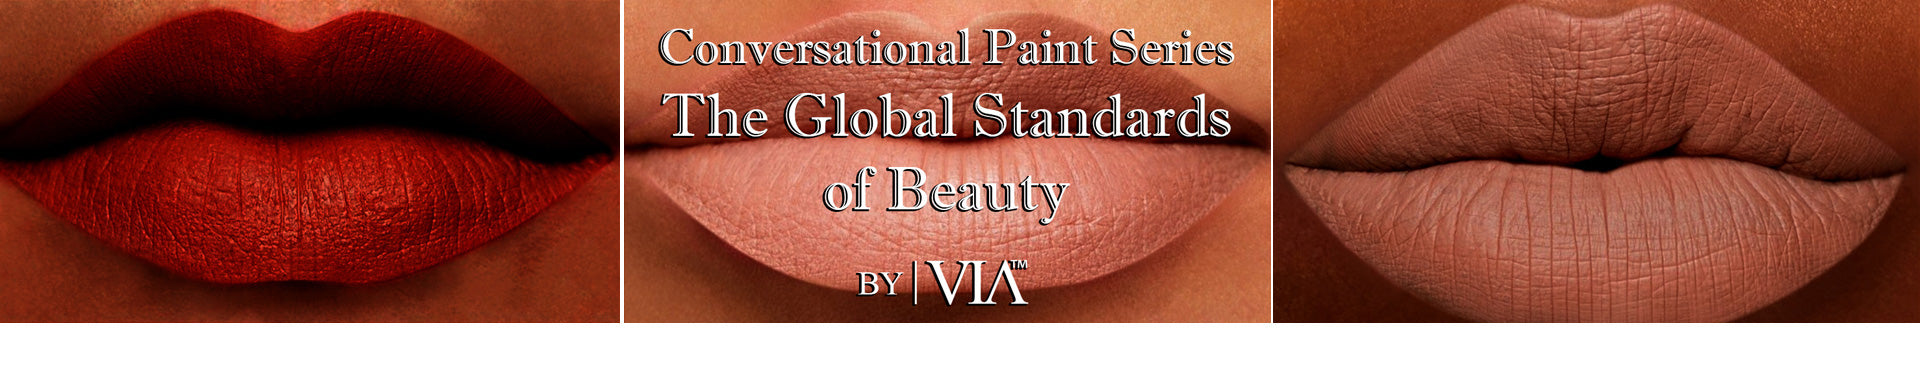 VIA presents from her Conversation Series: The Global Standards of Beauty